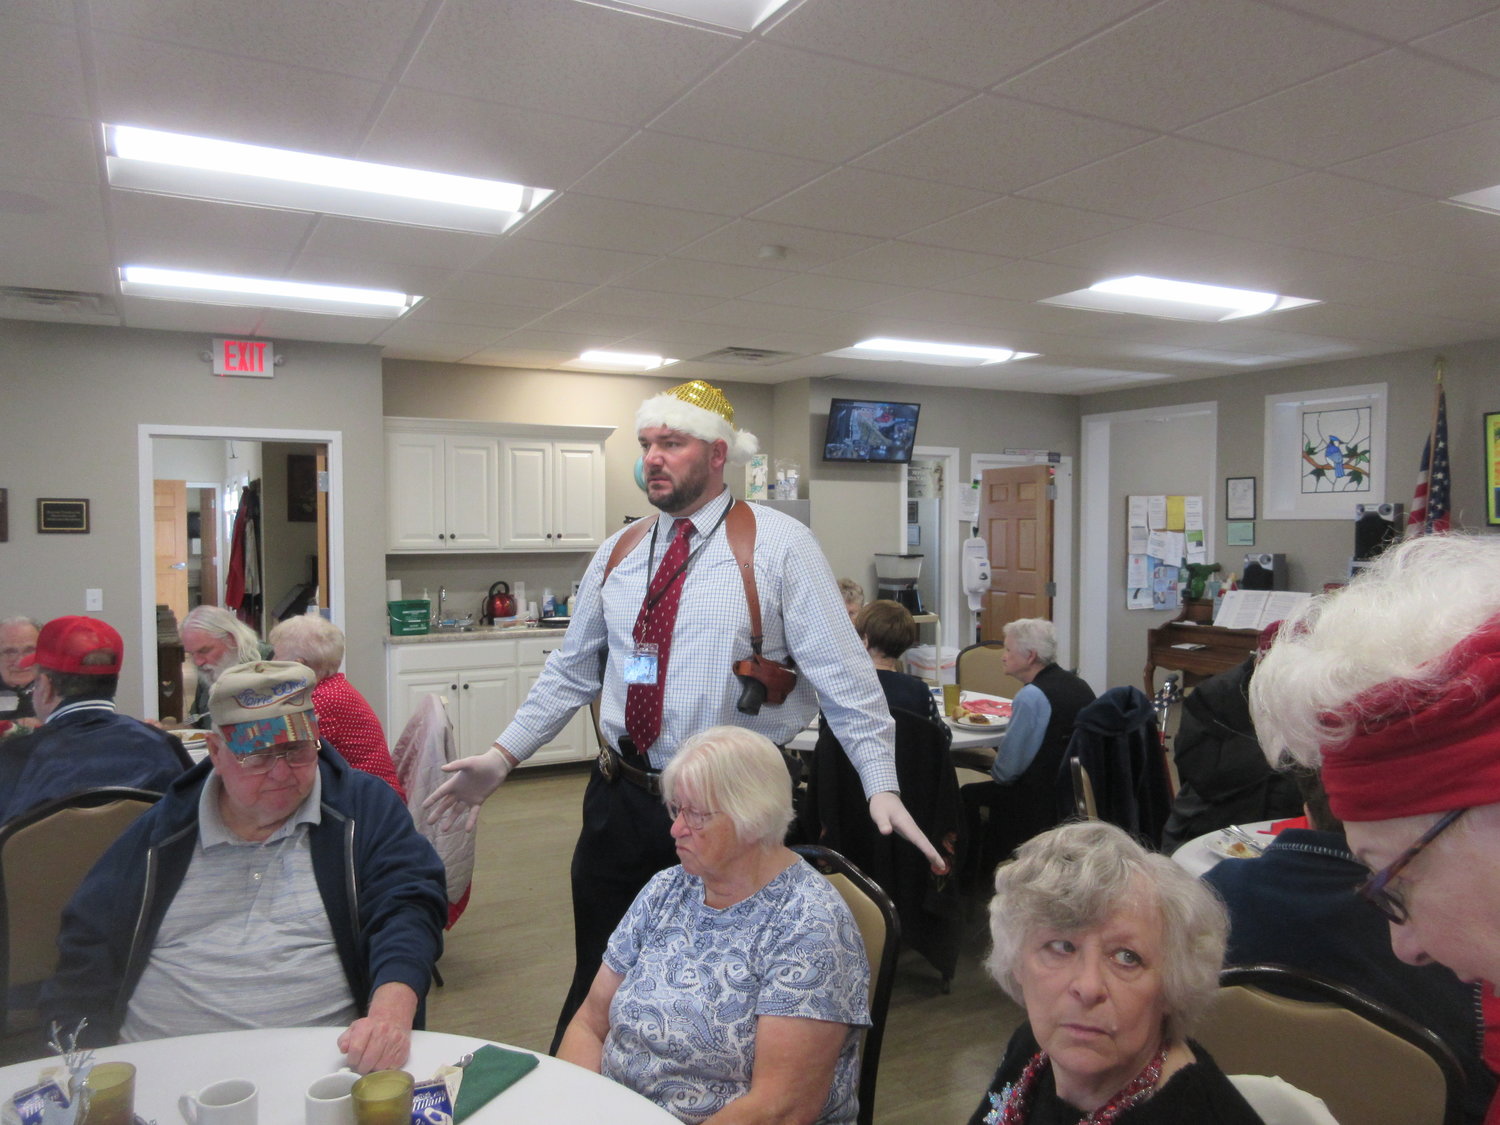  Sheriff Roye Cole volunteers to serve a meal at the Marshfield Senior Center ahead of the holidays.